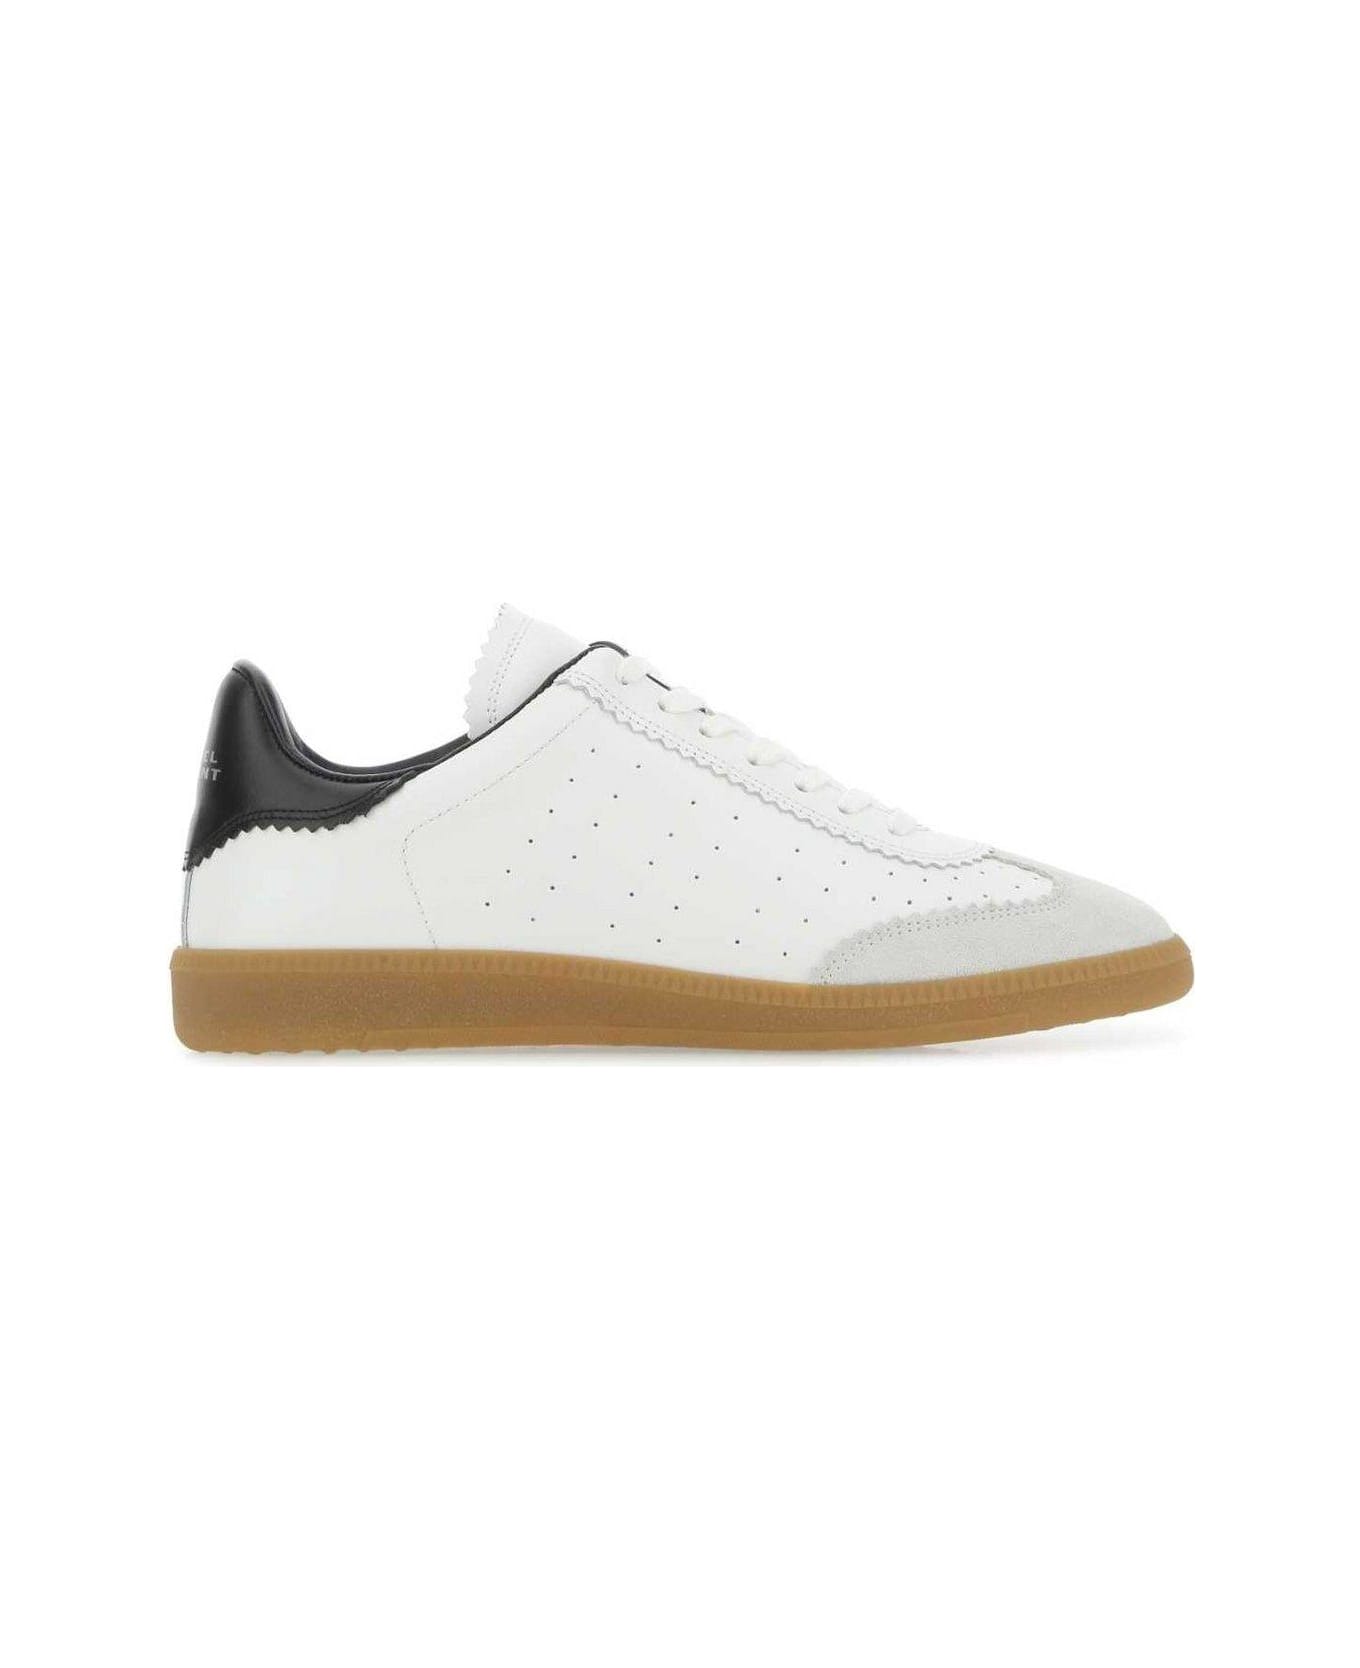 Isabel Marant Round Toe Lace-up Sneakers - White スニーカー